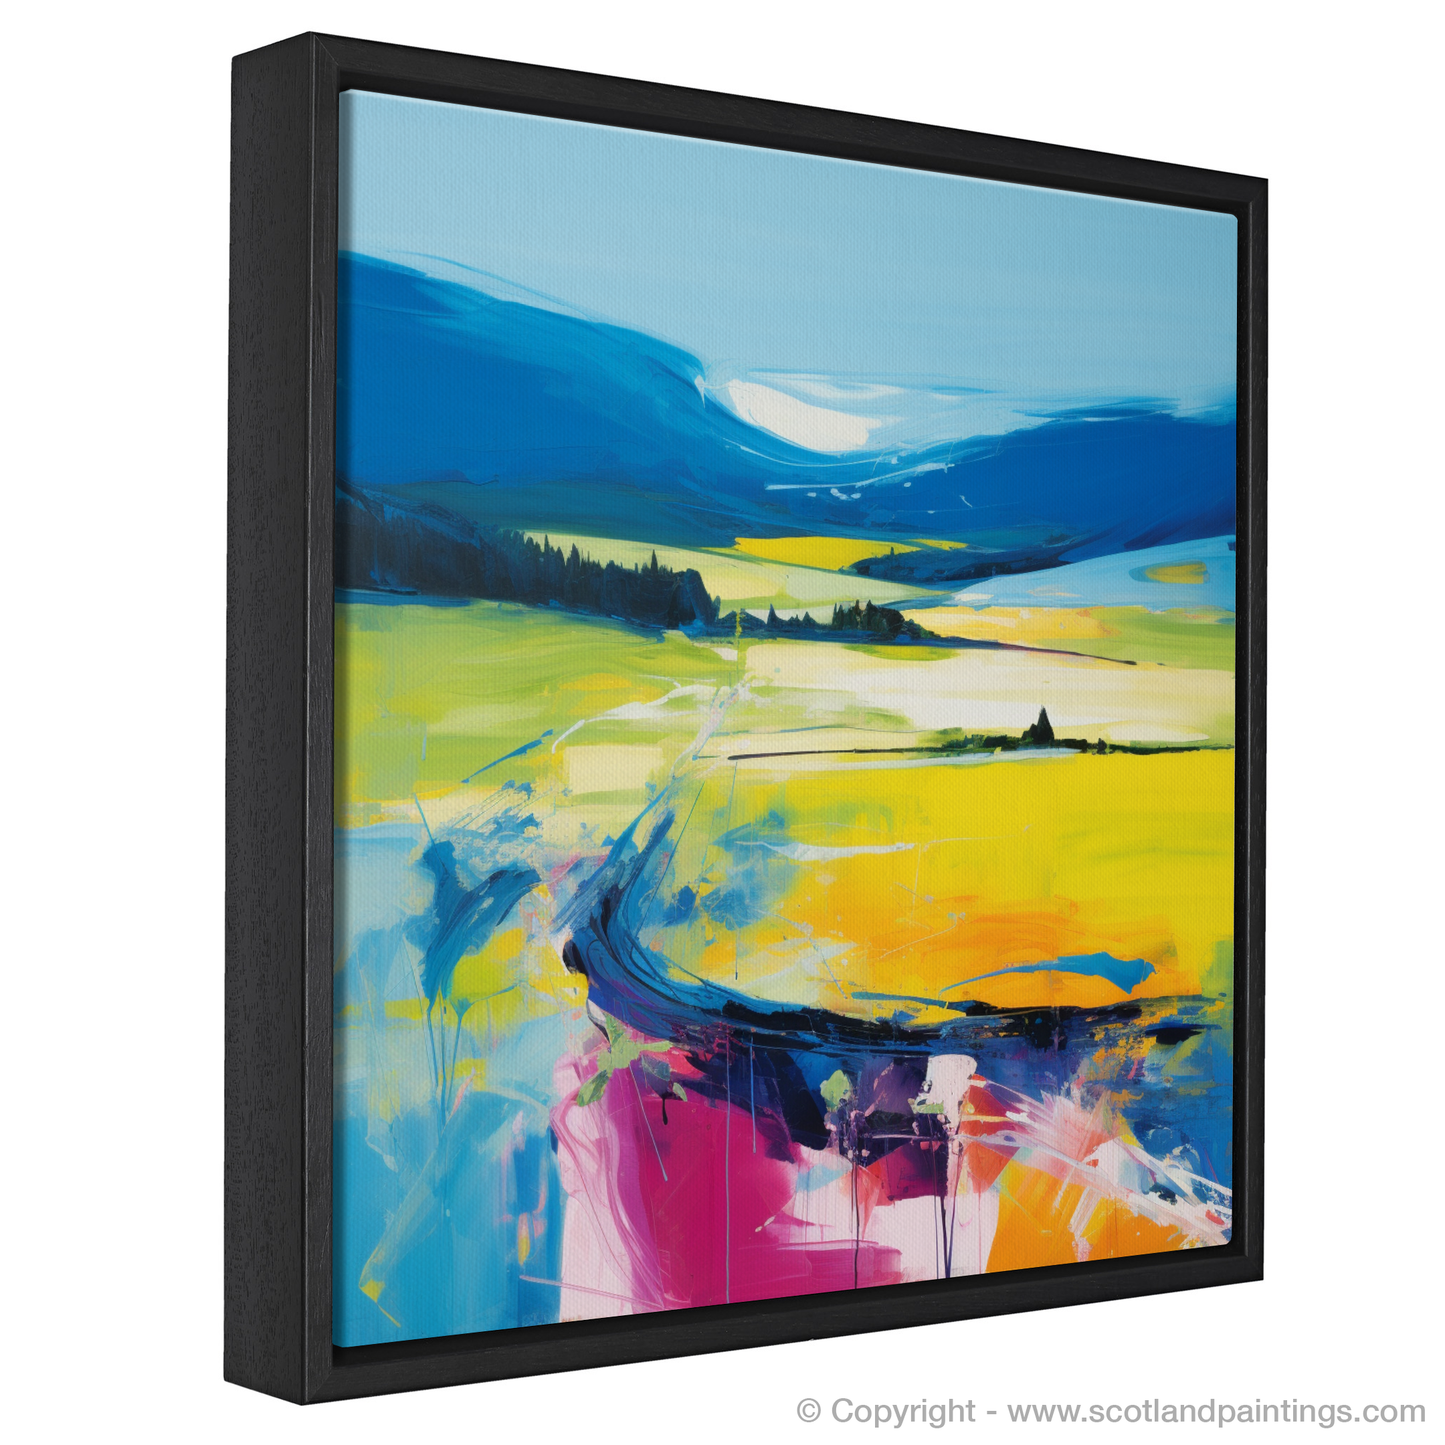 Painting and Art Print of Glenlivet, Moray in summer entitled "Summer Splendour of Glenlivet Moray".